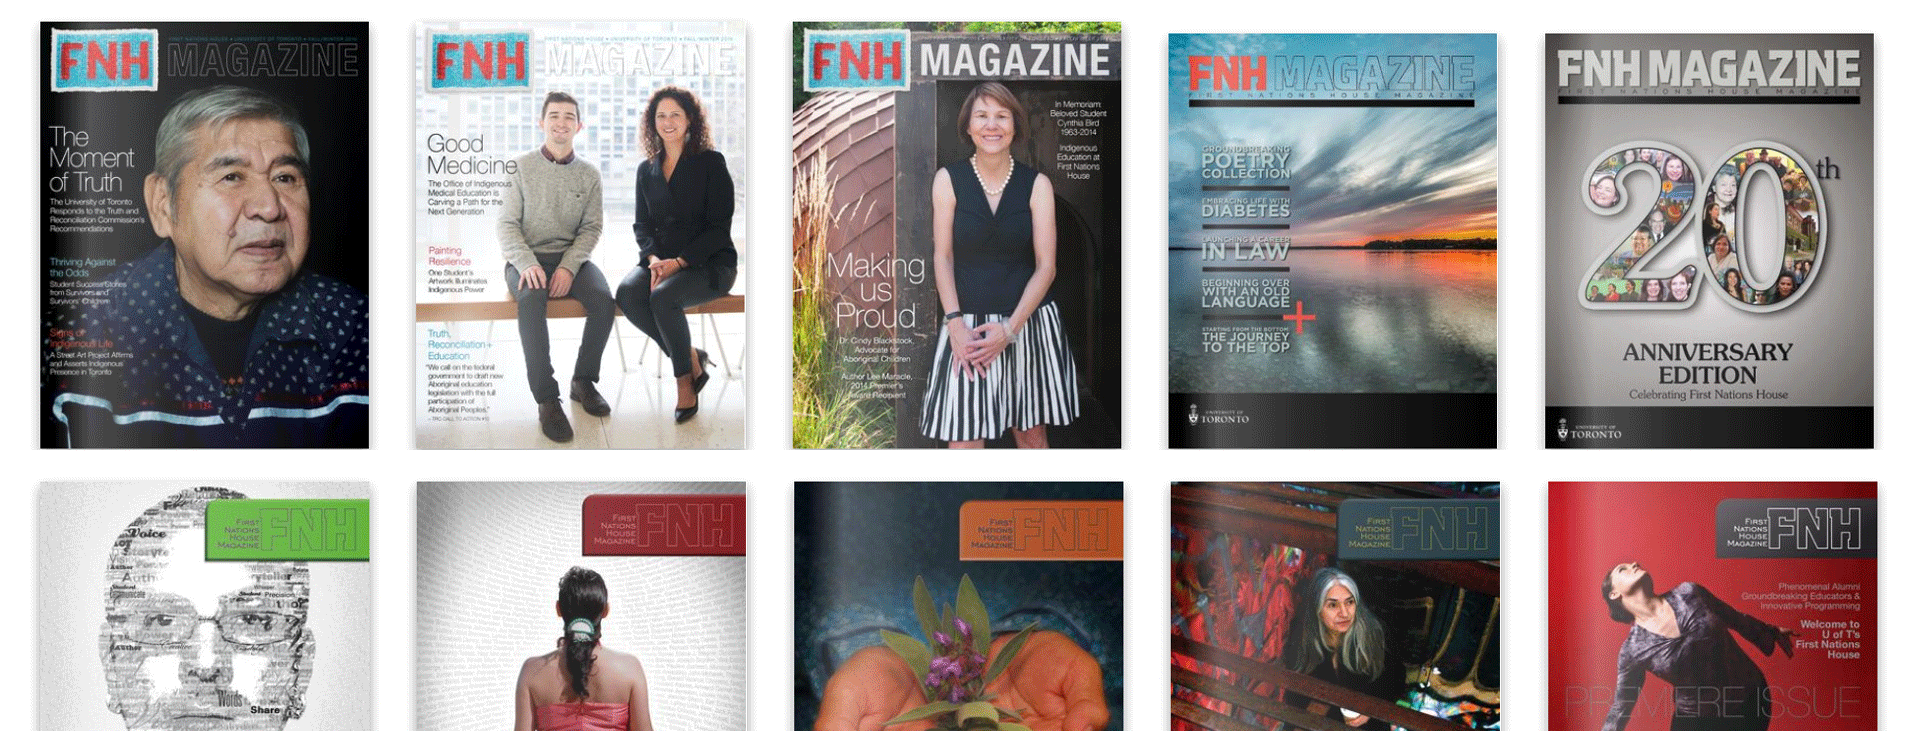 A sampling of archived FNH Magazine covers